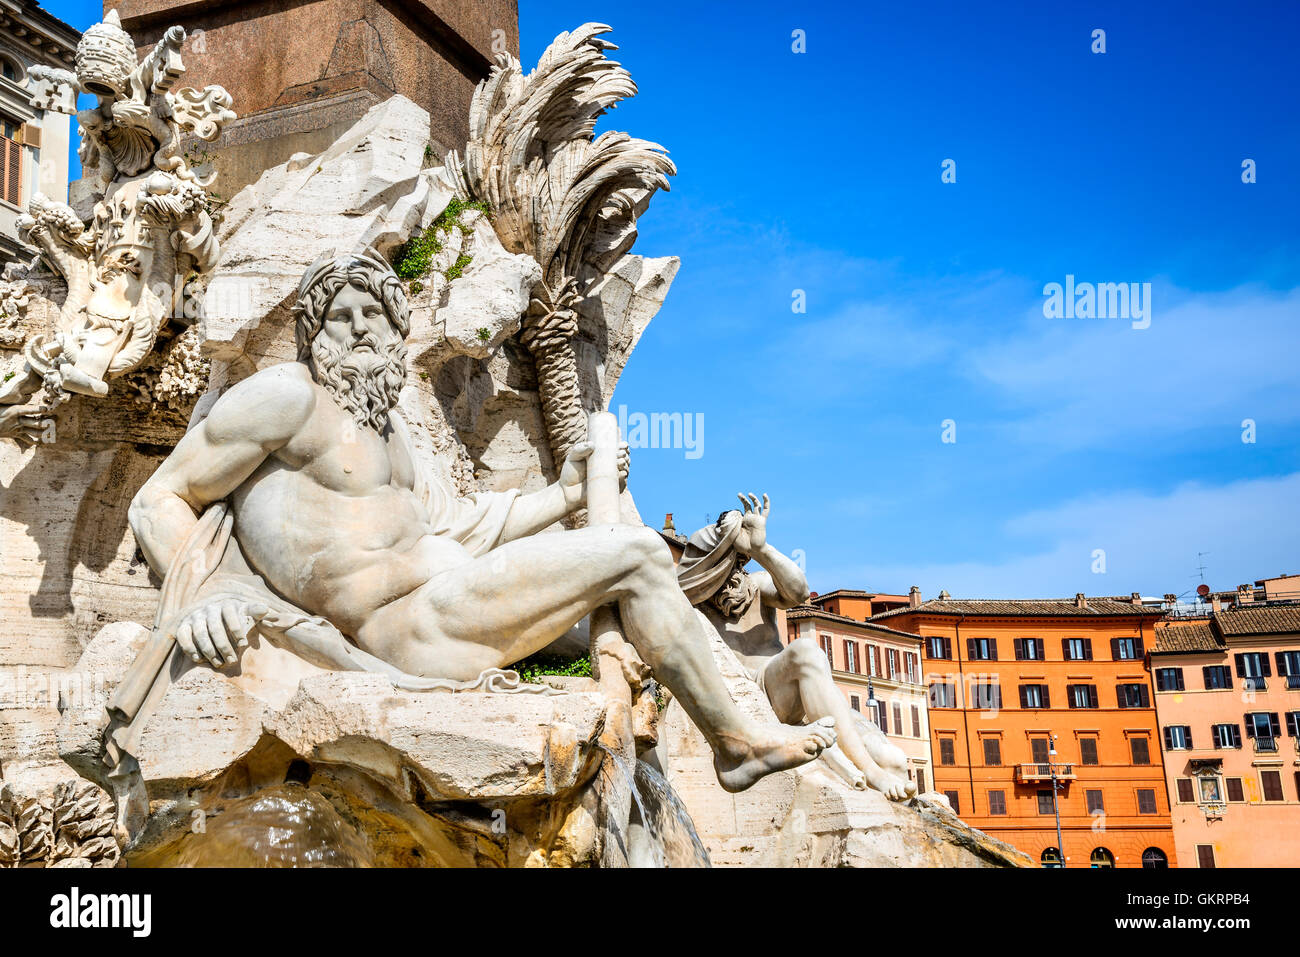 Rome, Italy. Fountain of the Four Rivers (Fontana dei Quattro Fiumi) with an Egyptian obelisk in famous Piazza Navona square Stock Photo